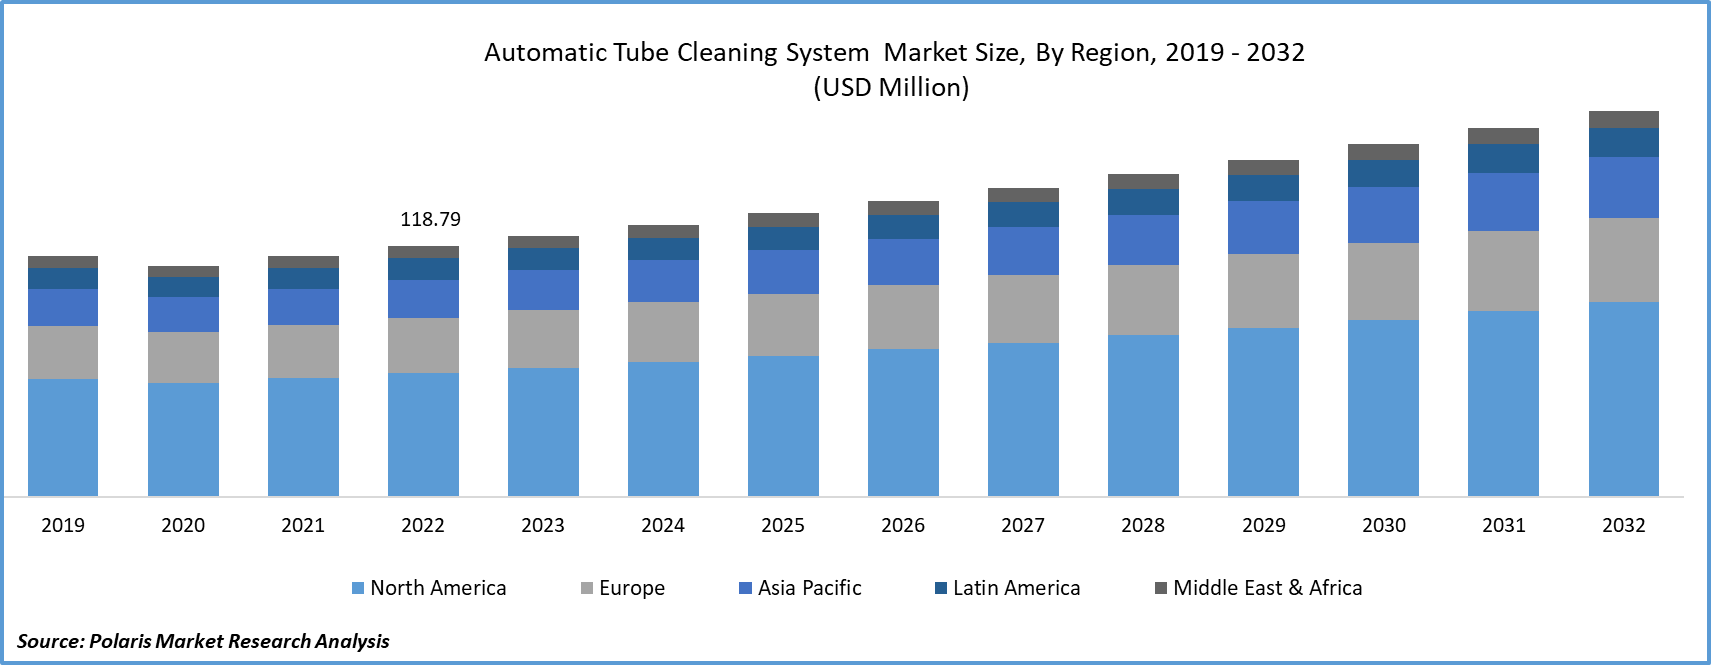 Automatic Tube Cleaning System Market Size